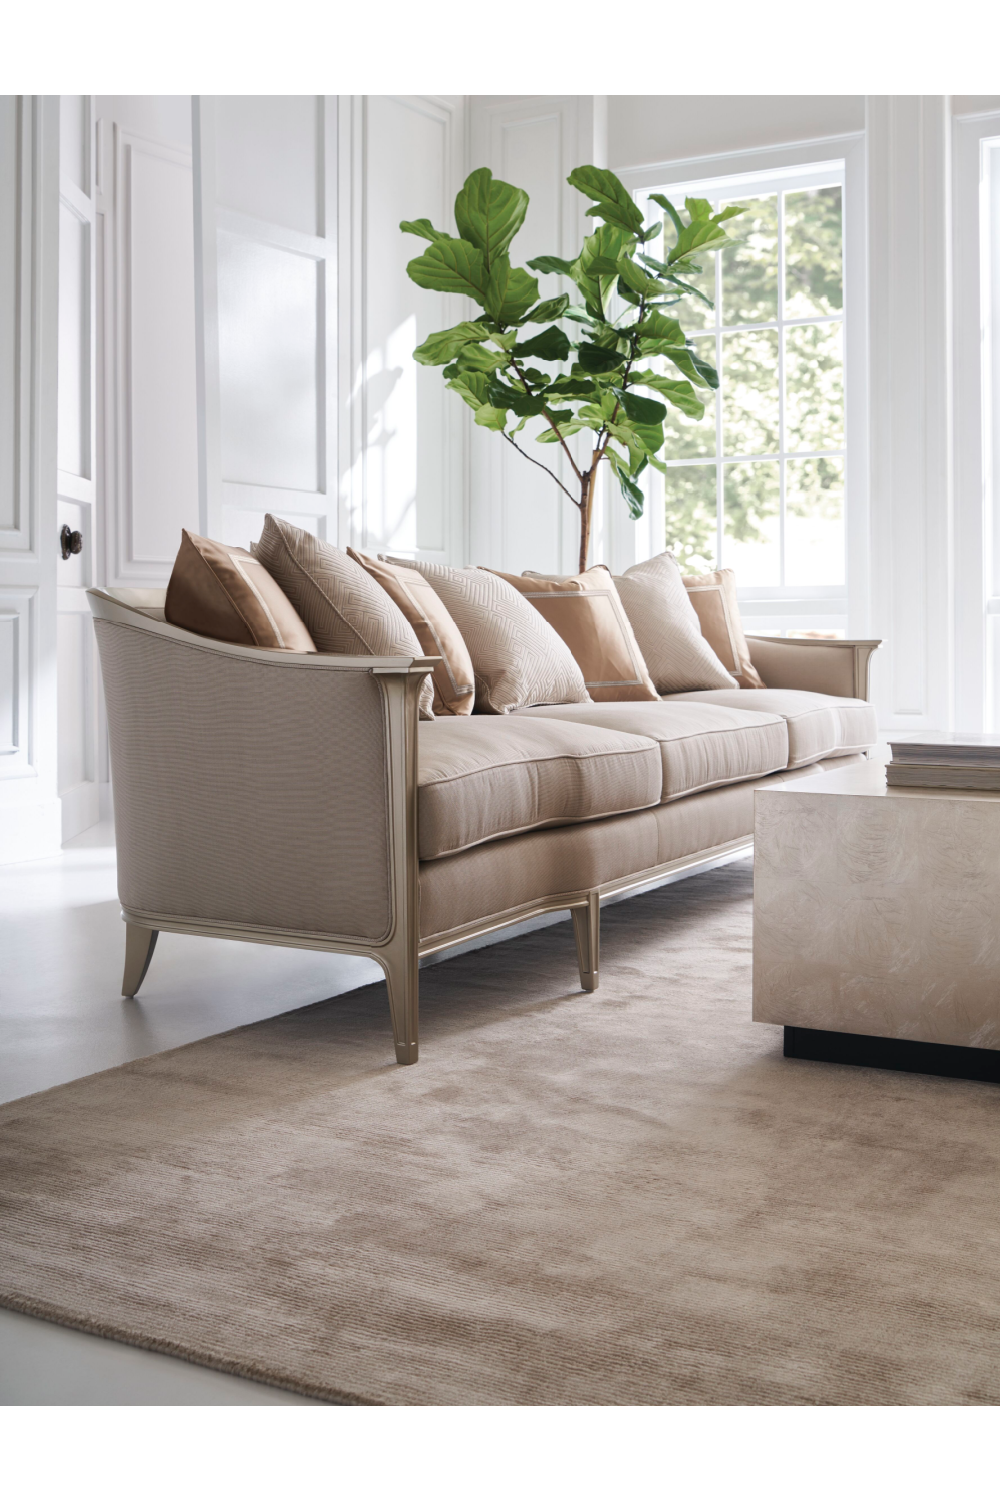 Rectangular Taupe Coffee Table | Caracole Cocktail Couture | Oroa.com